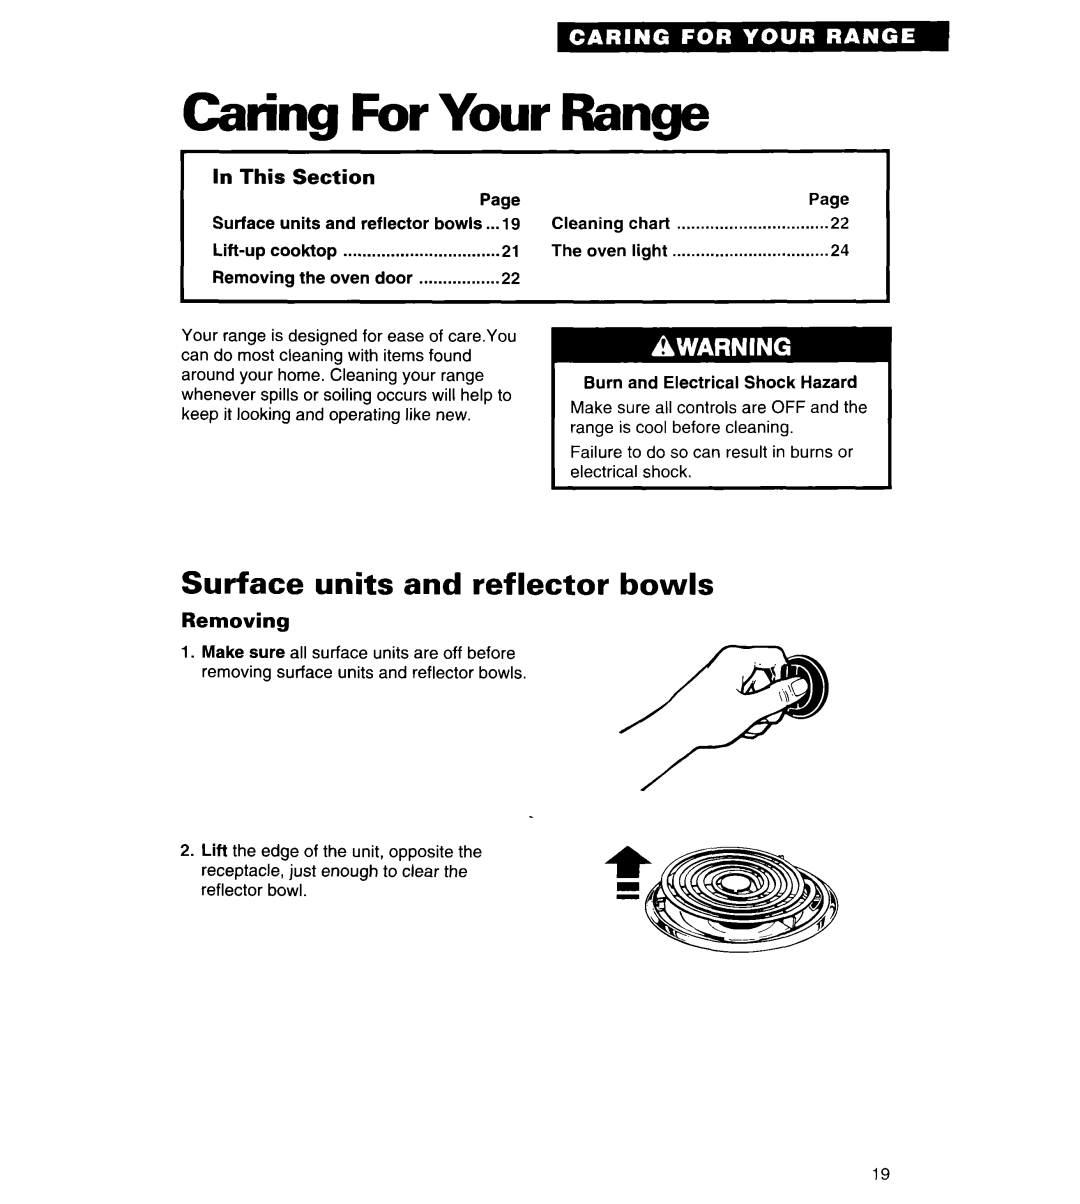 Whirlpool RS313PXY Caring For Your Range, Surface units and reflector bowls, In This Section, Removing 